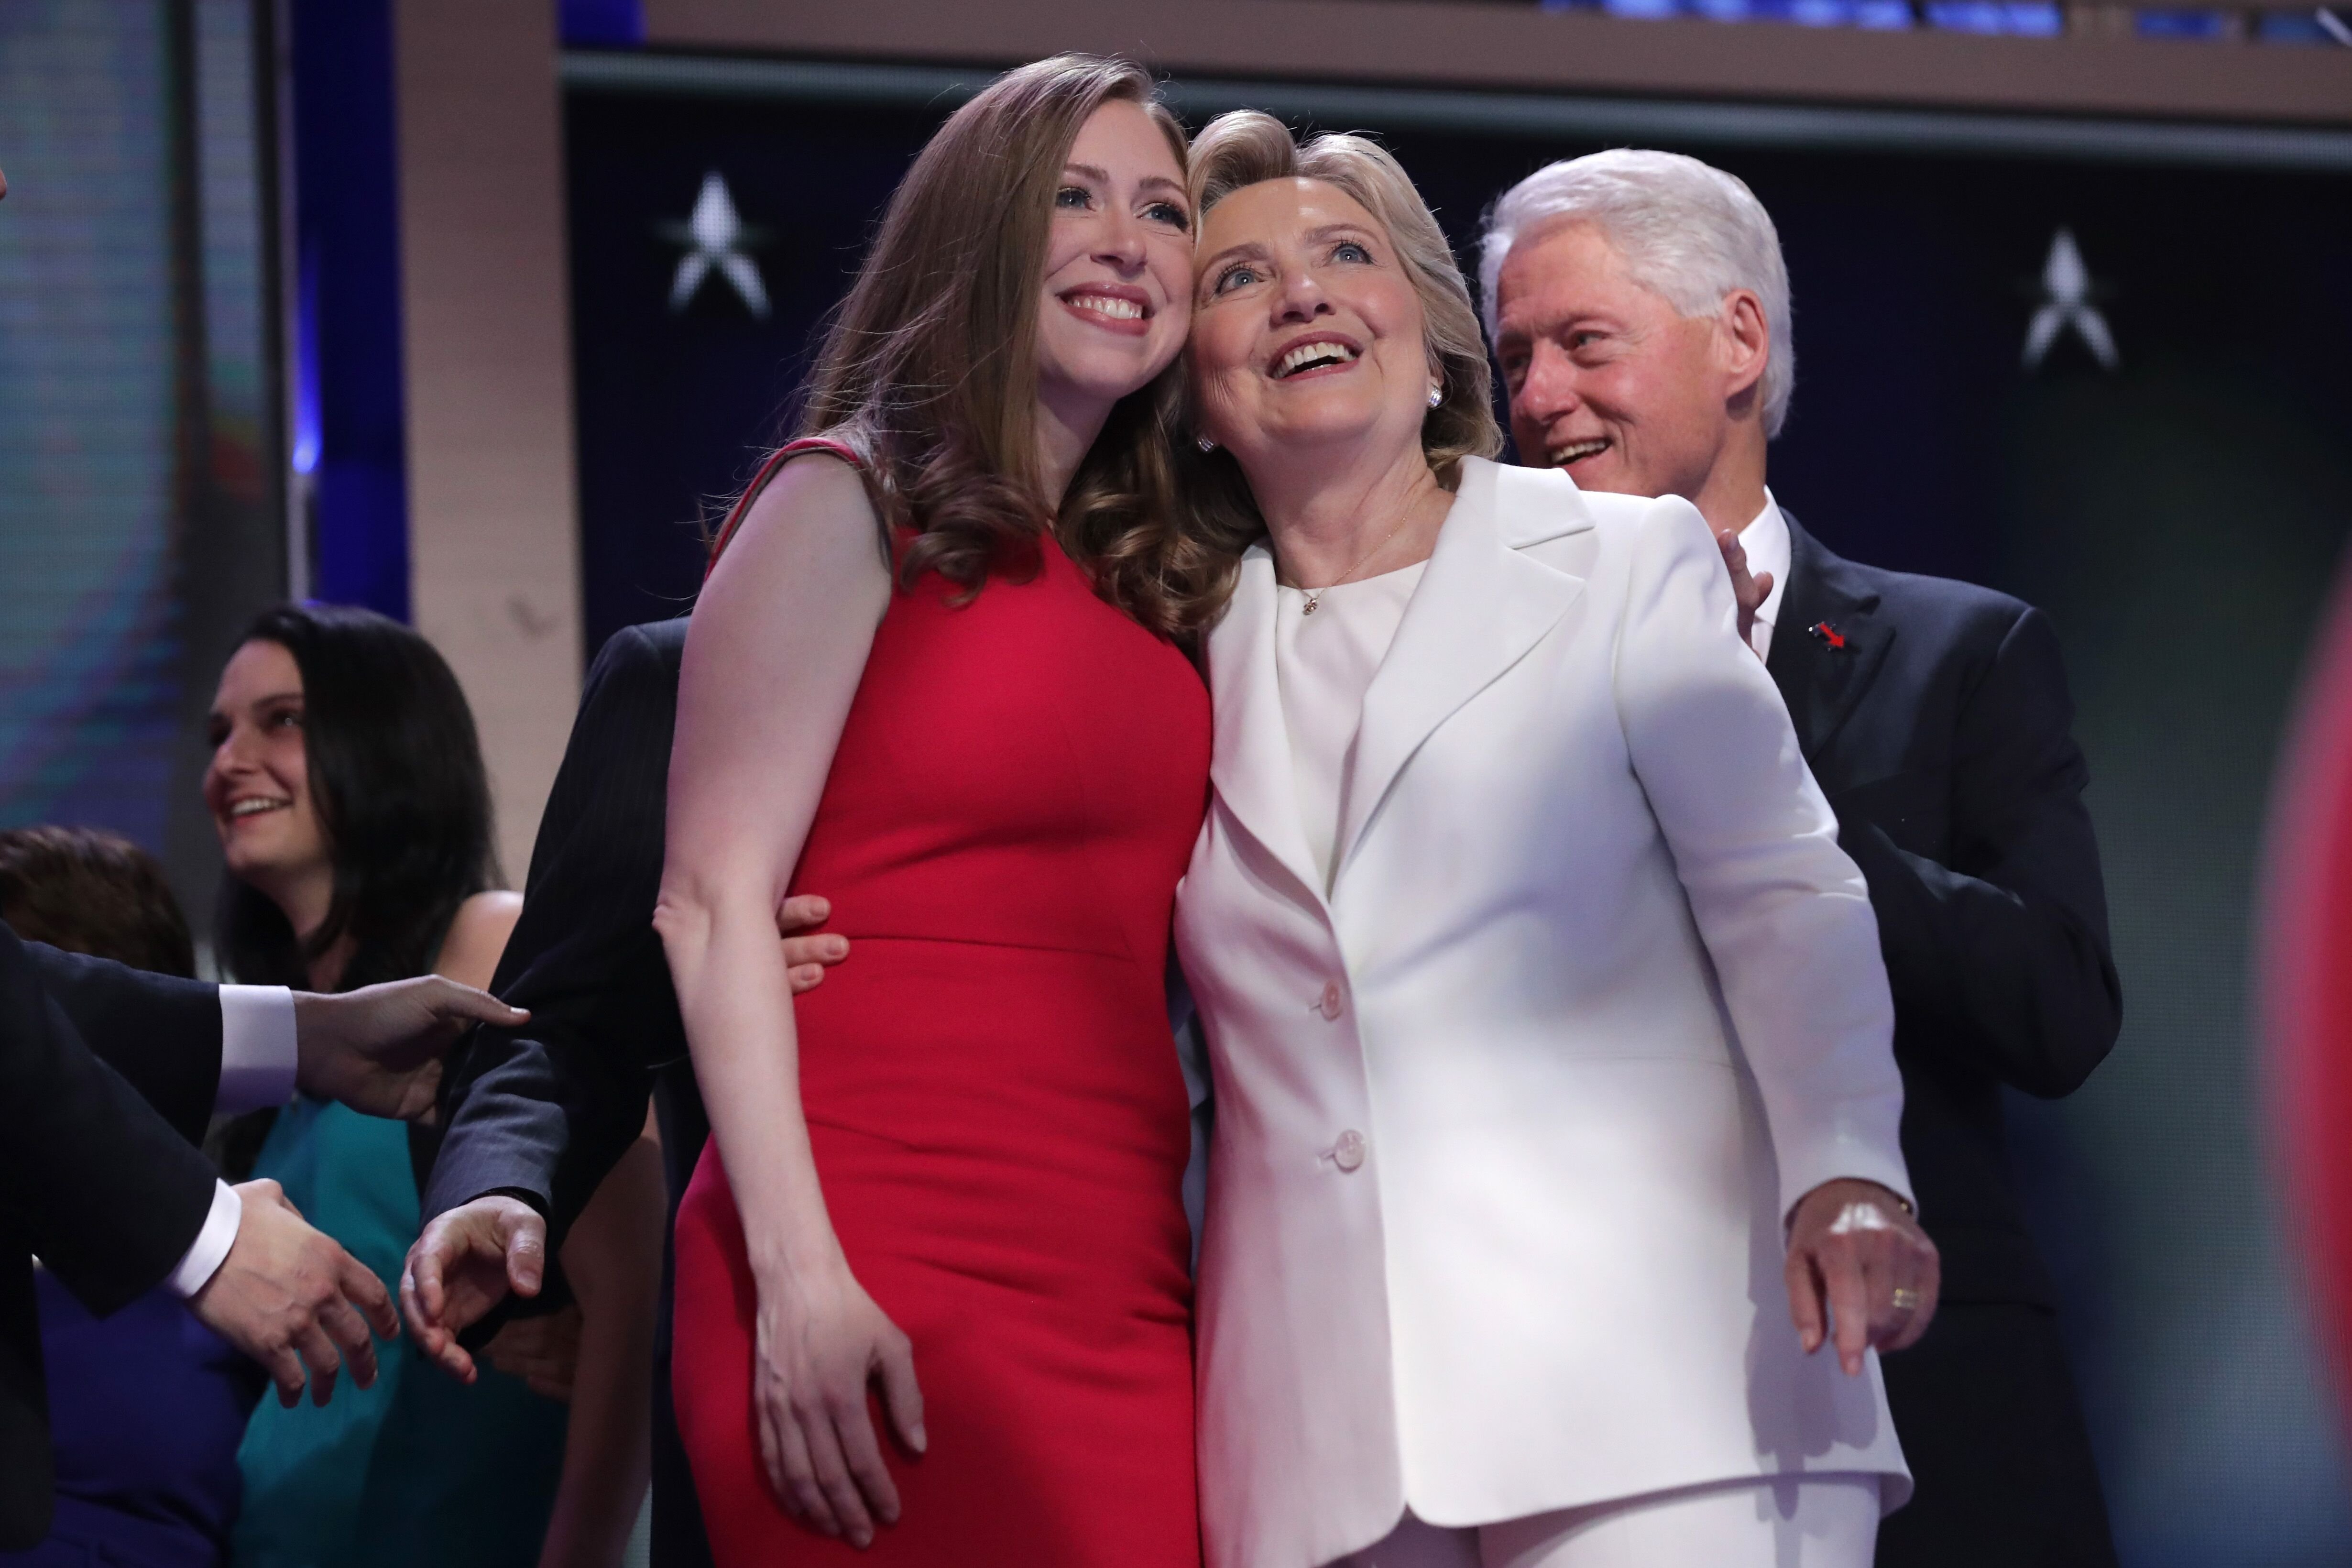 Hillary Clinton and Chelsea Clinton at the Democratic National Convention. | Source: Getty Images